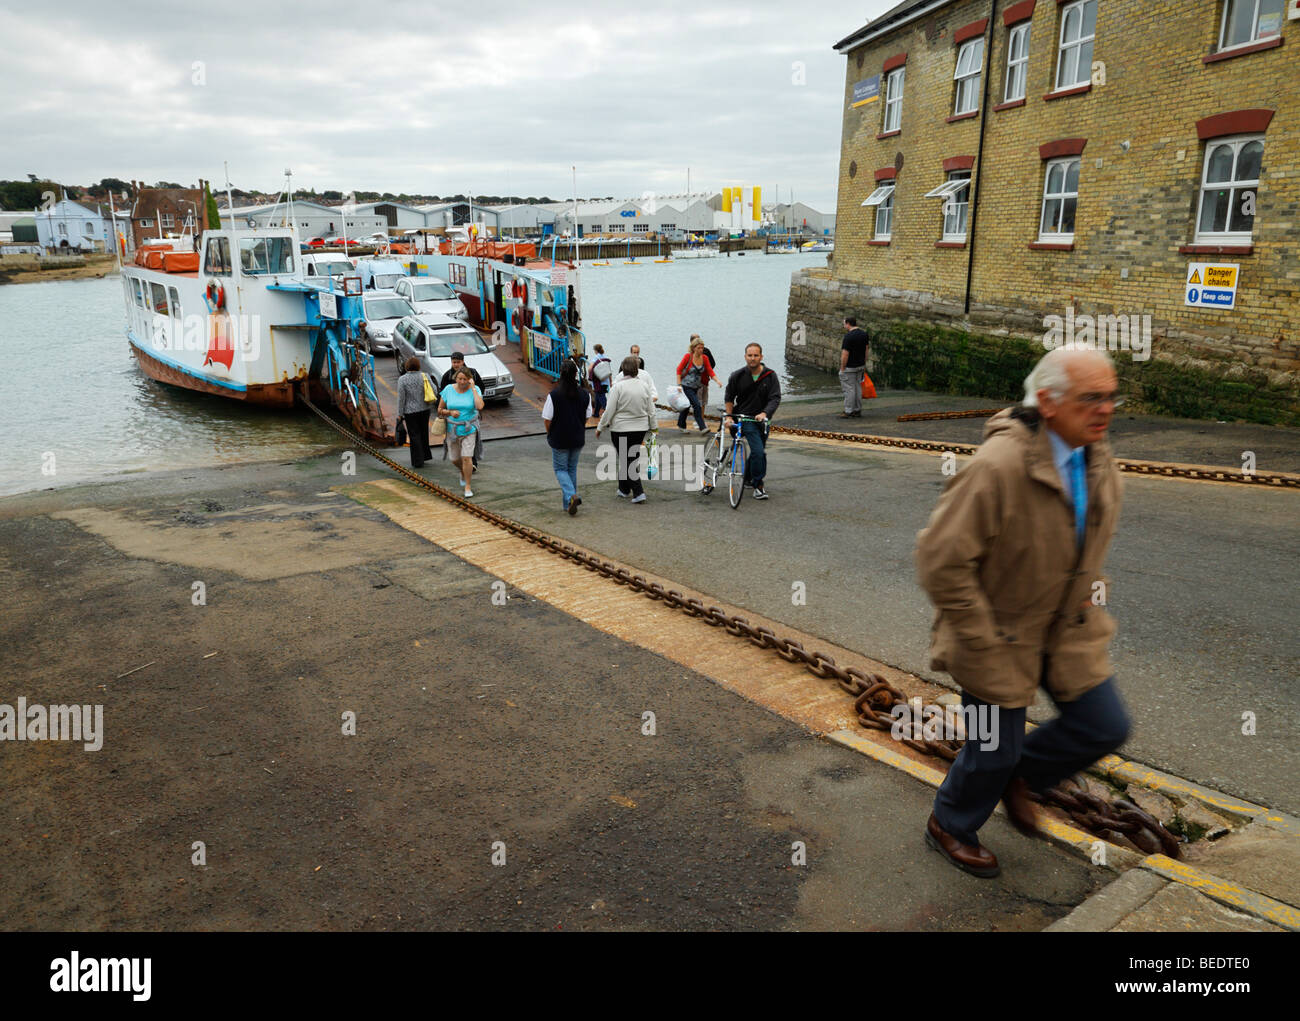 Passengers disembarking from the Cowes chain ferry. Cowes, Isle of Wight, England, UK. Stock Photo